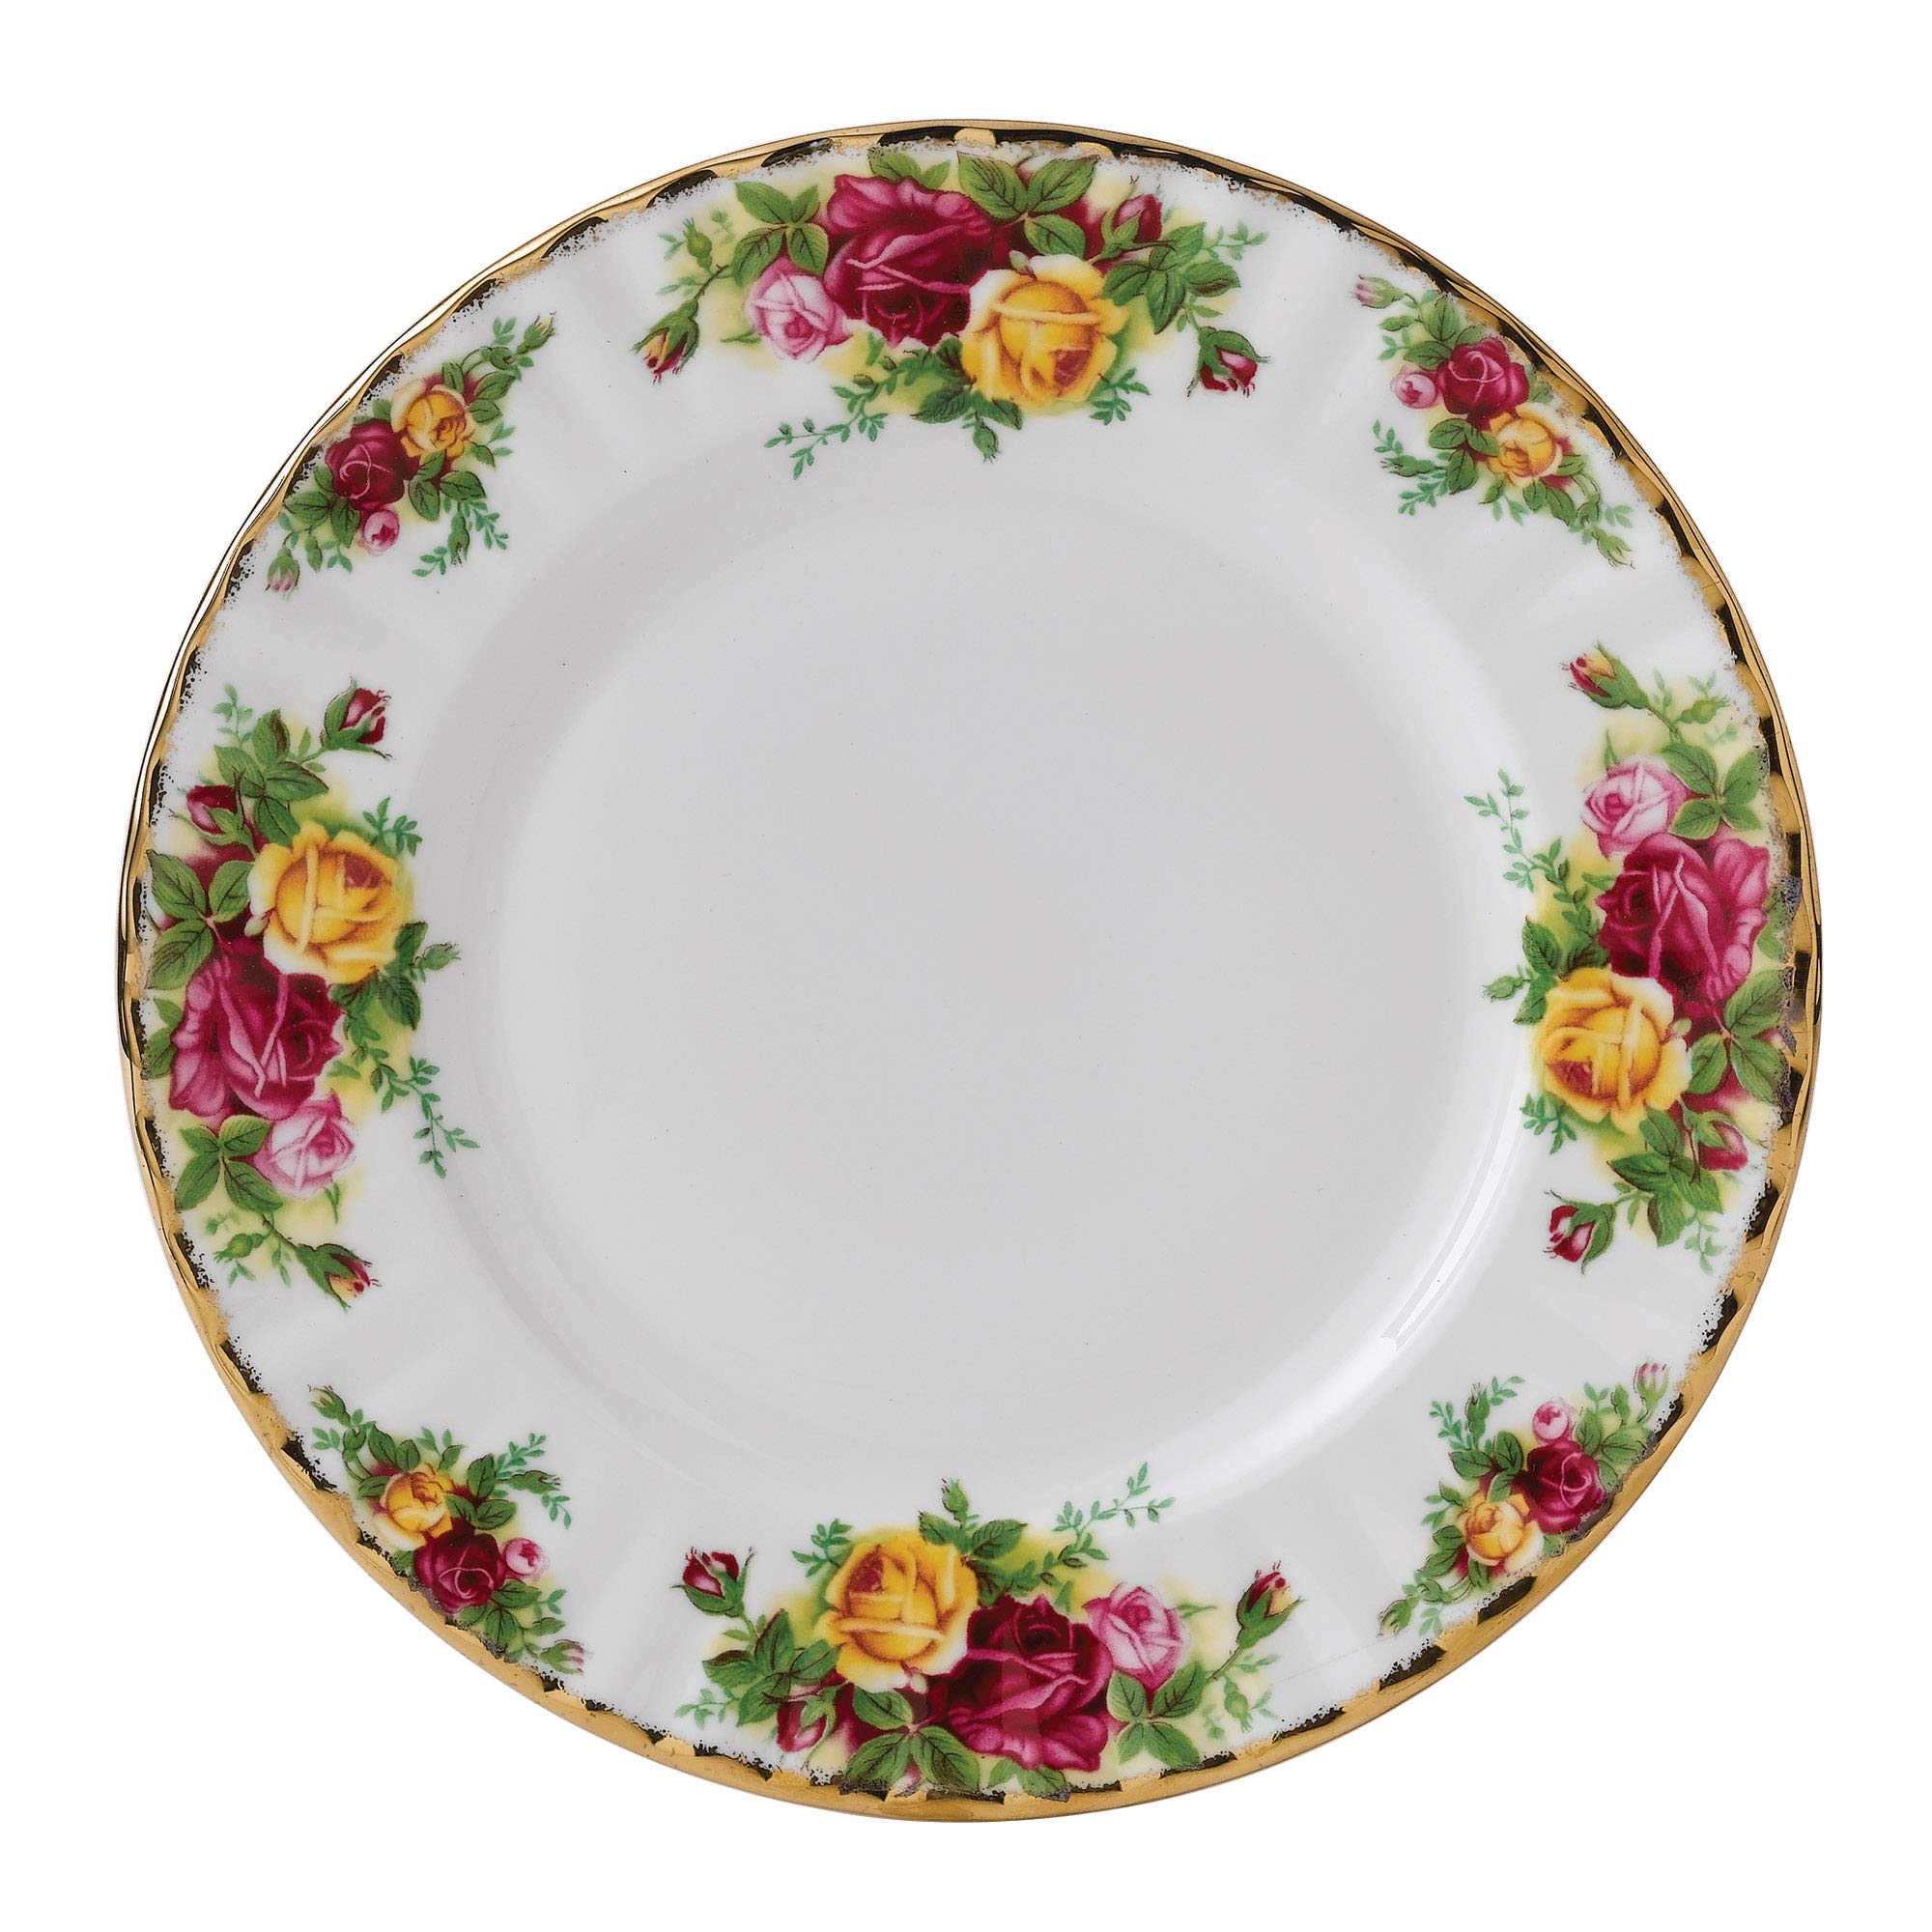 Royal Albert Old Country Roses Set of 4 Salad Plates, 8", Multi